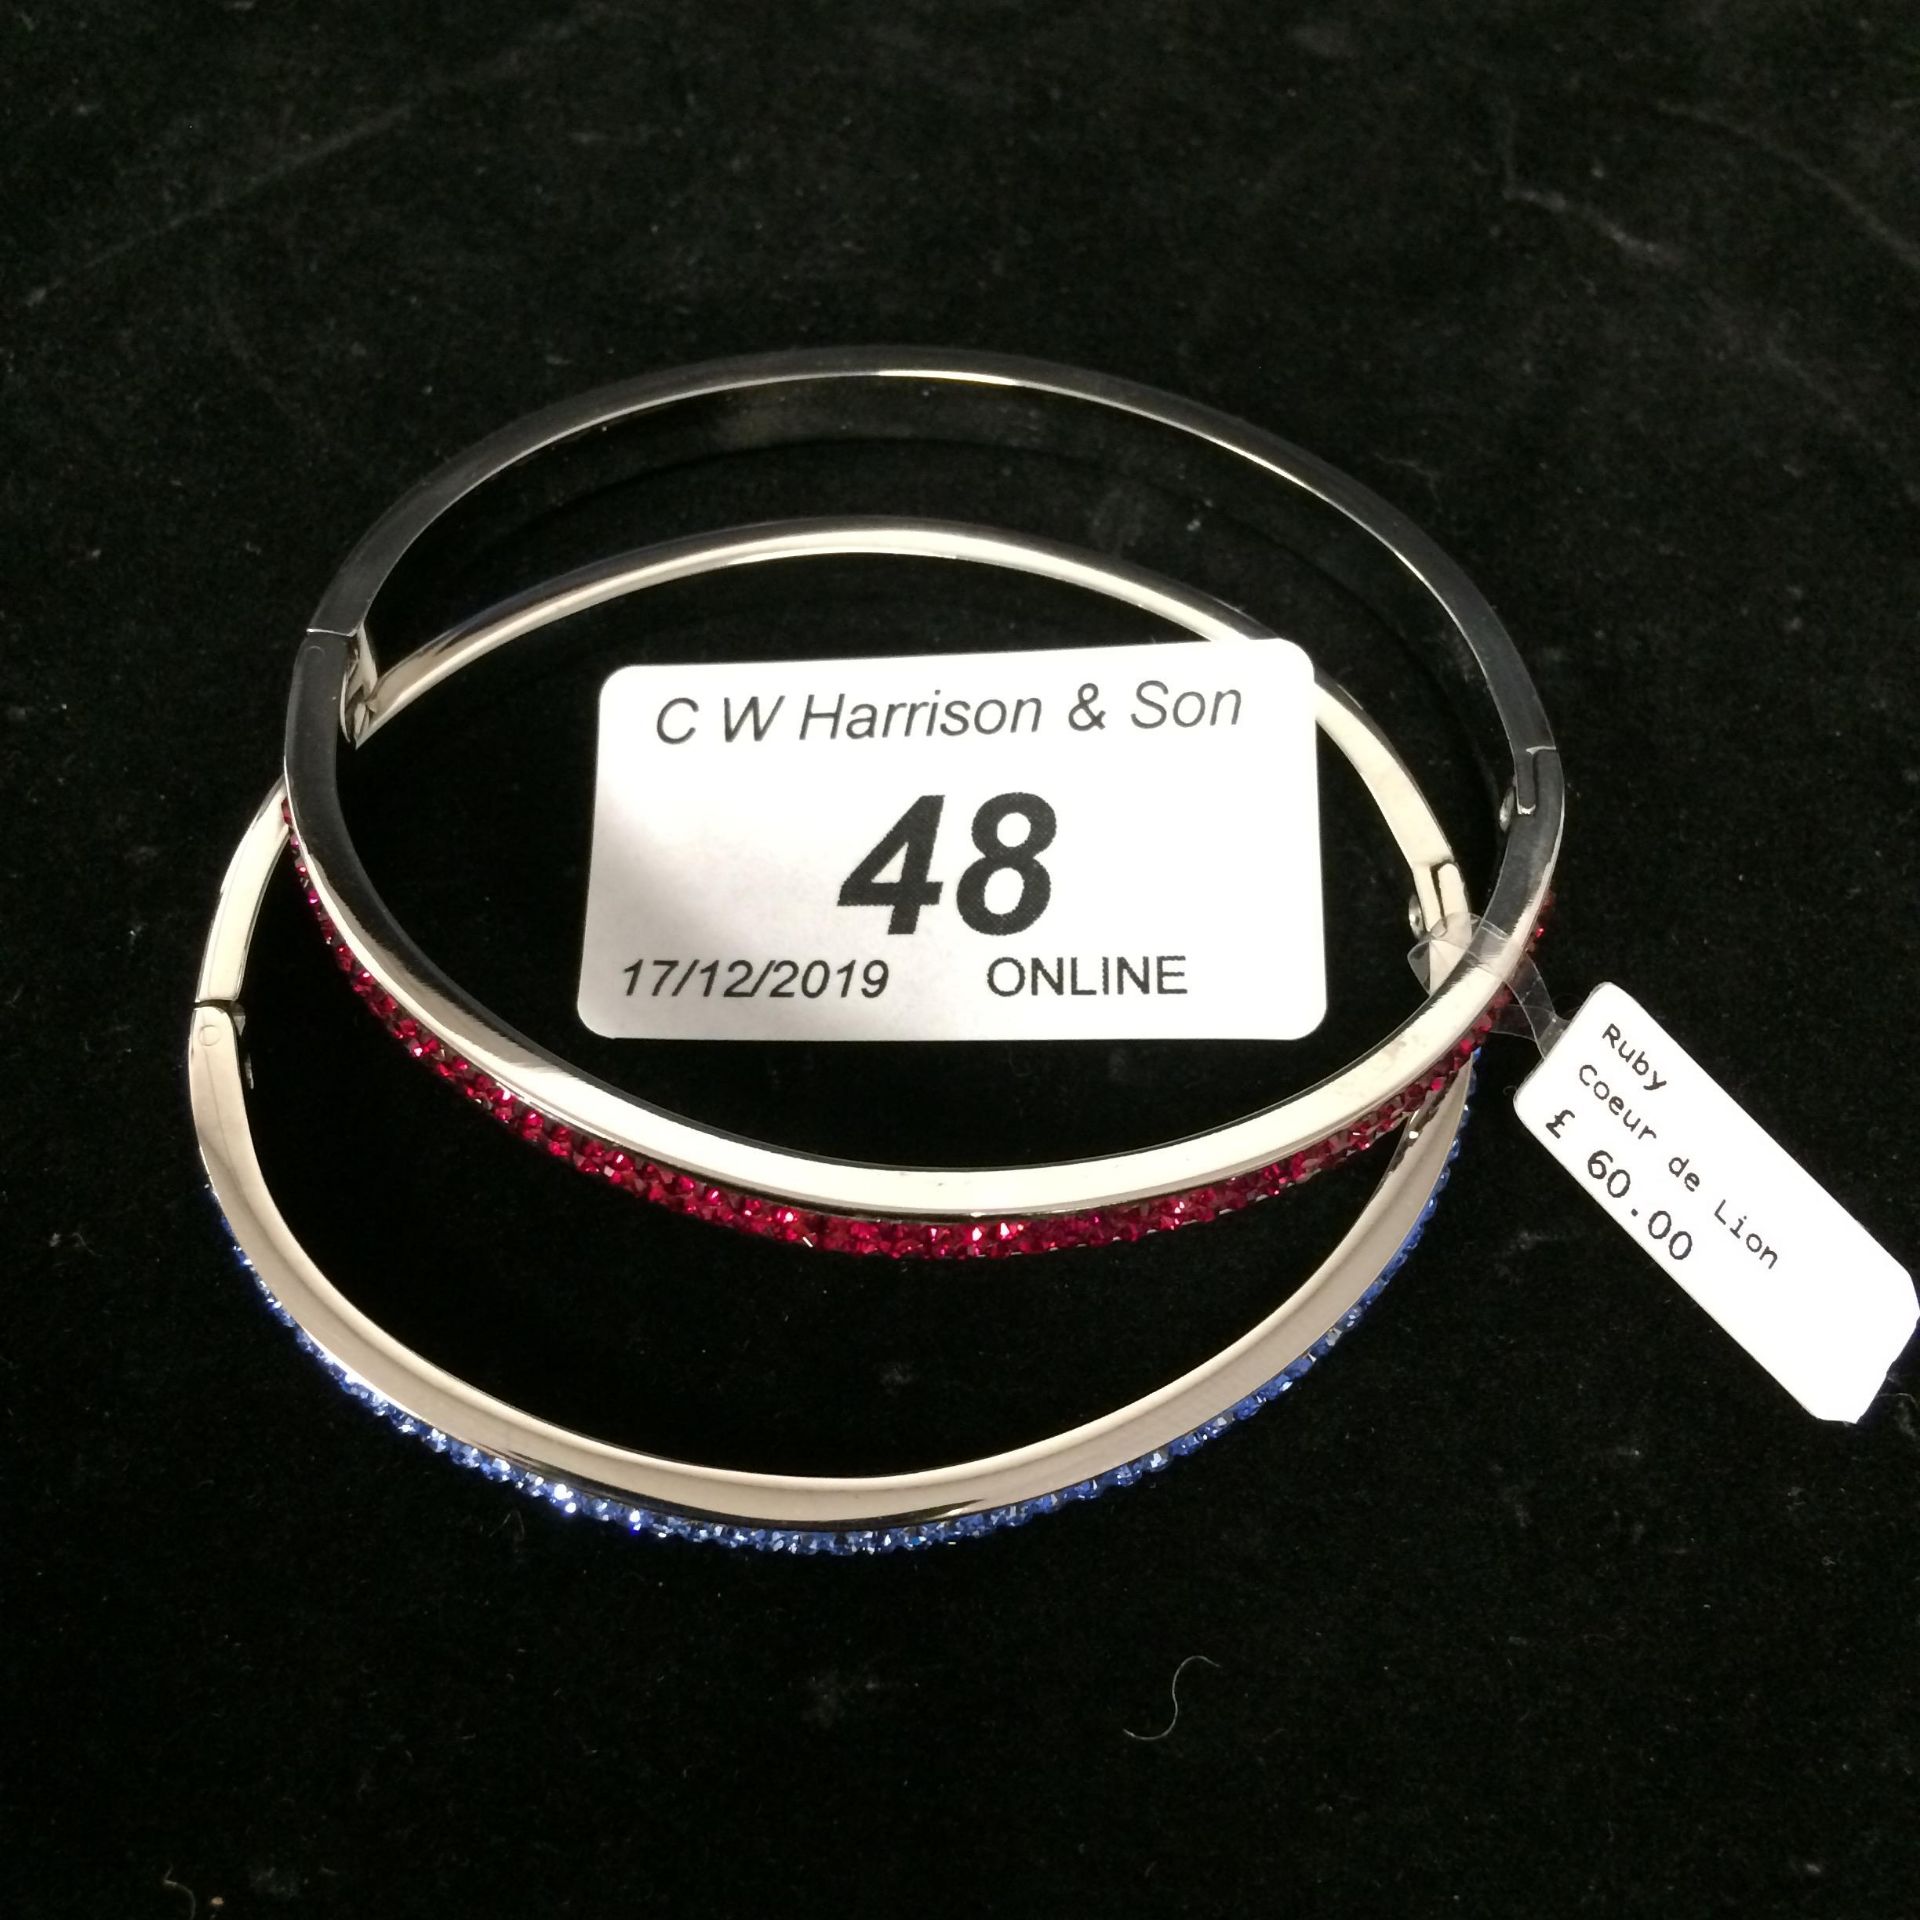 2 x bangles by Coeur De Lion RRP £60 each (please note this lot is subject to vat)